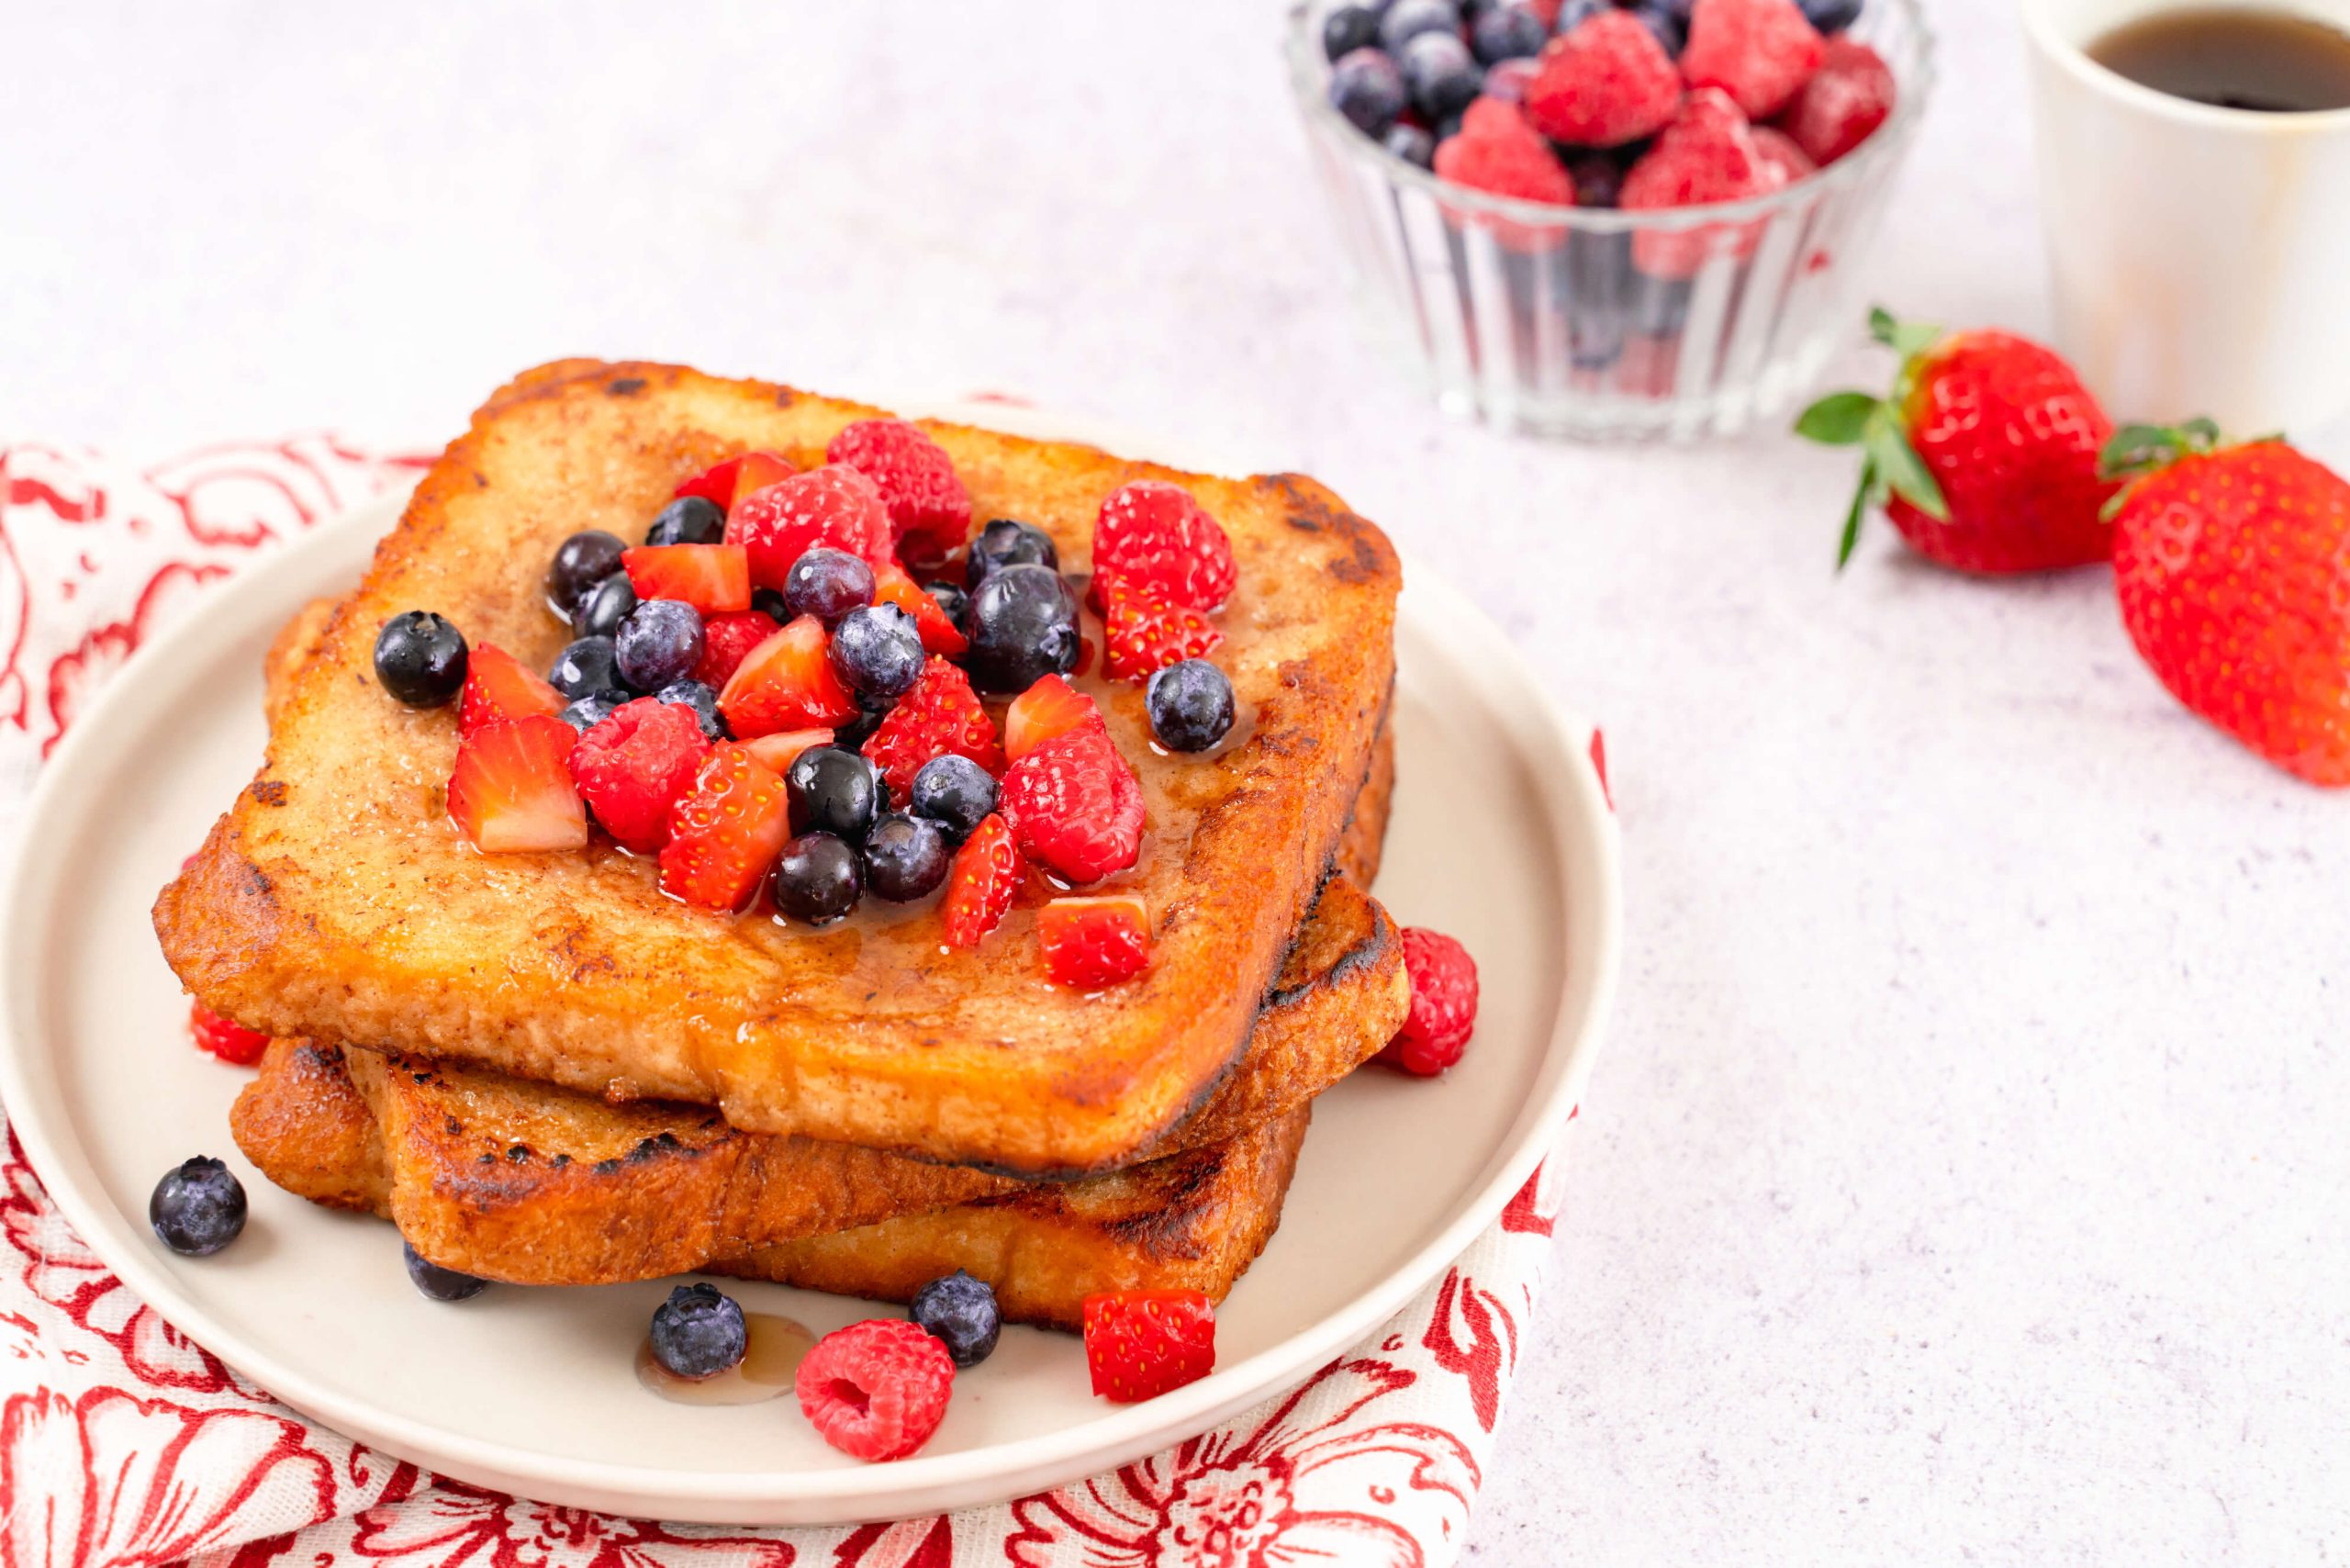 almond milk french toast topped with berries on plate